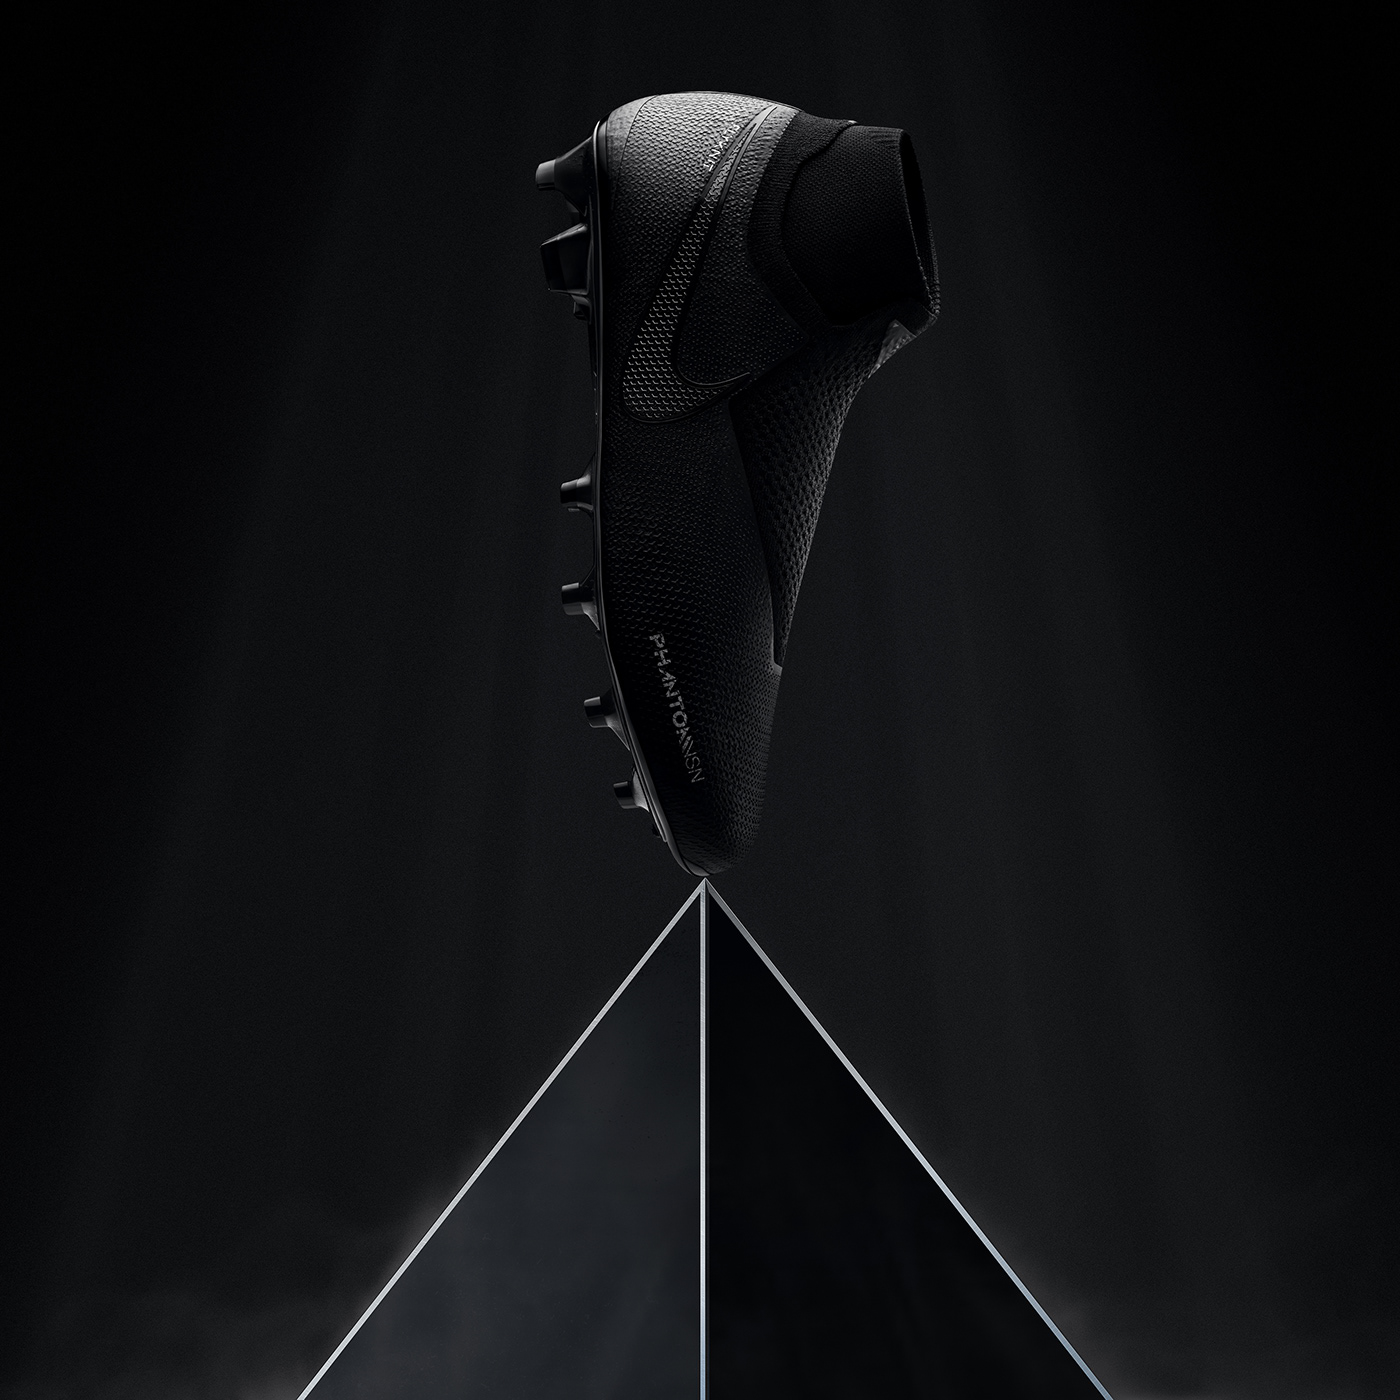 football soccer Nike product concrete stealth black Moody lighting sculpture